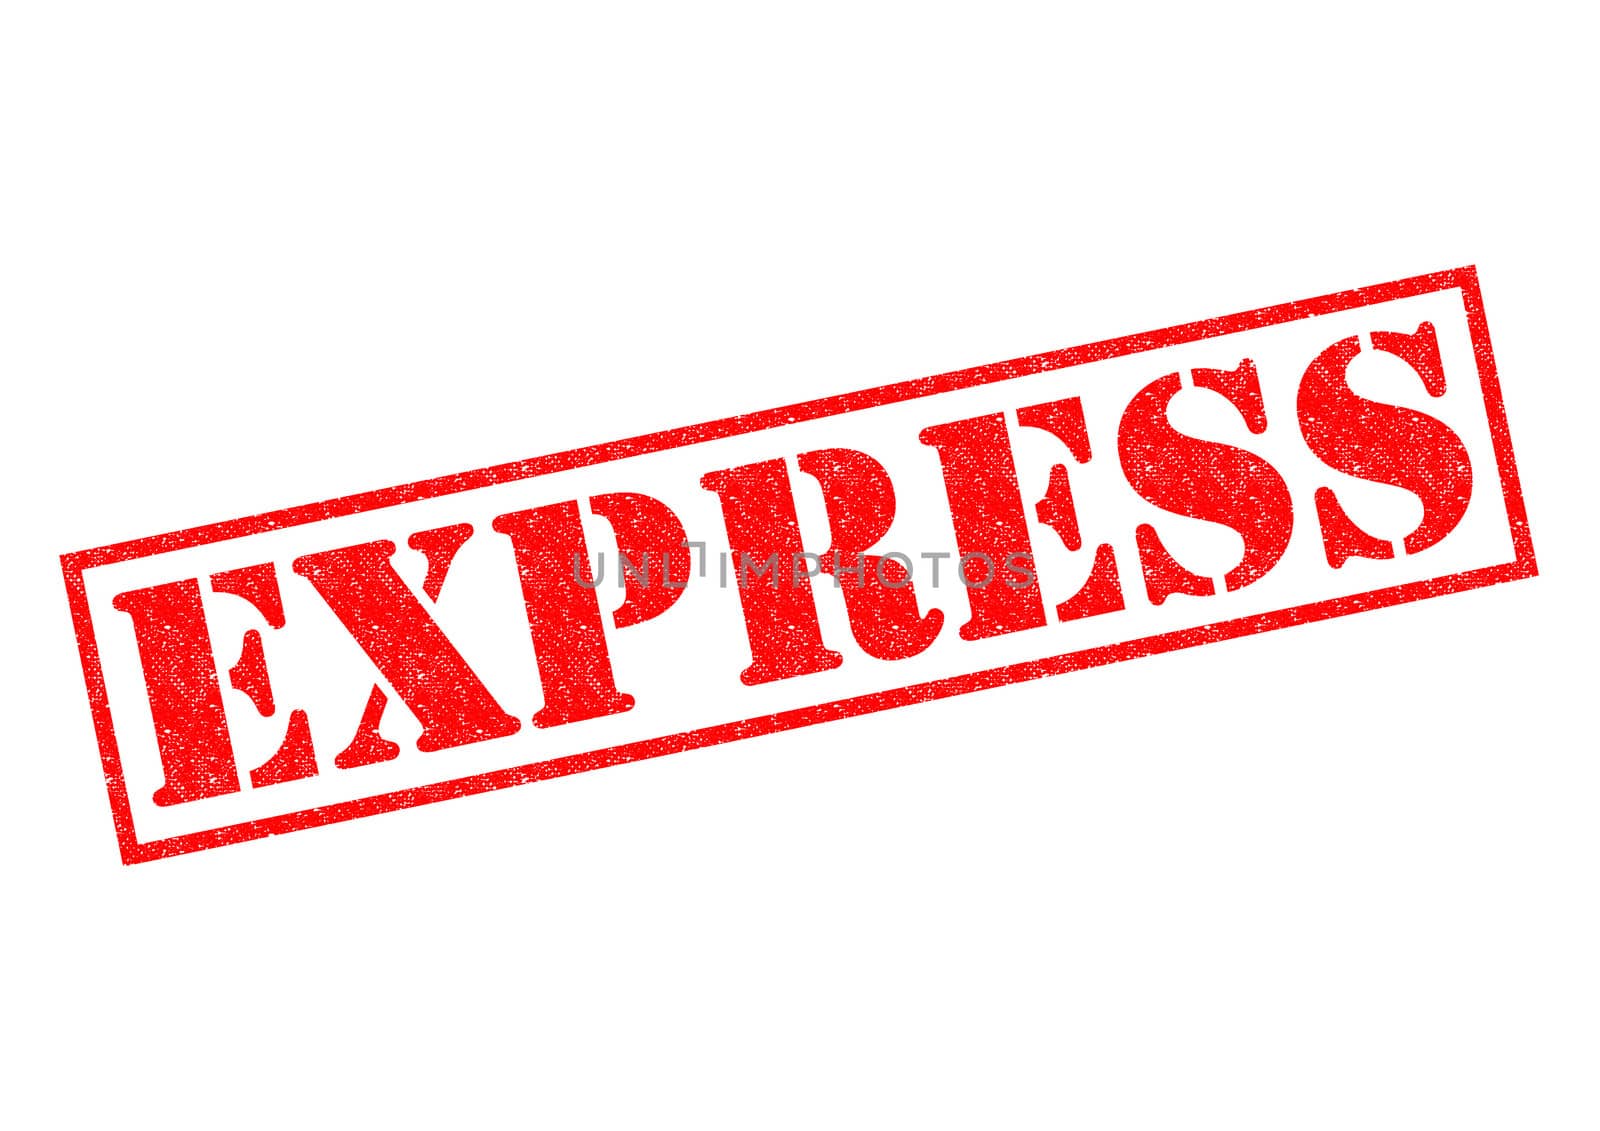 EXPRESS red Rubber Stamp over a white background.